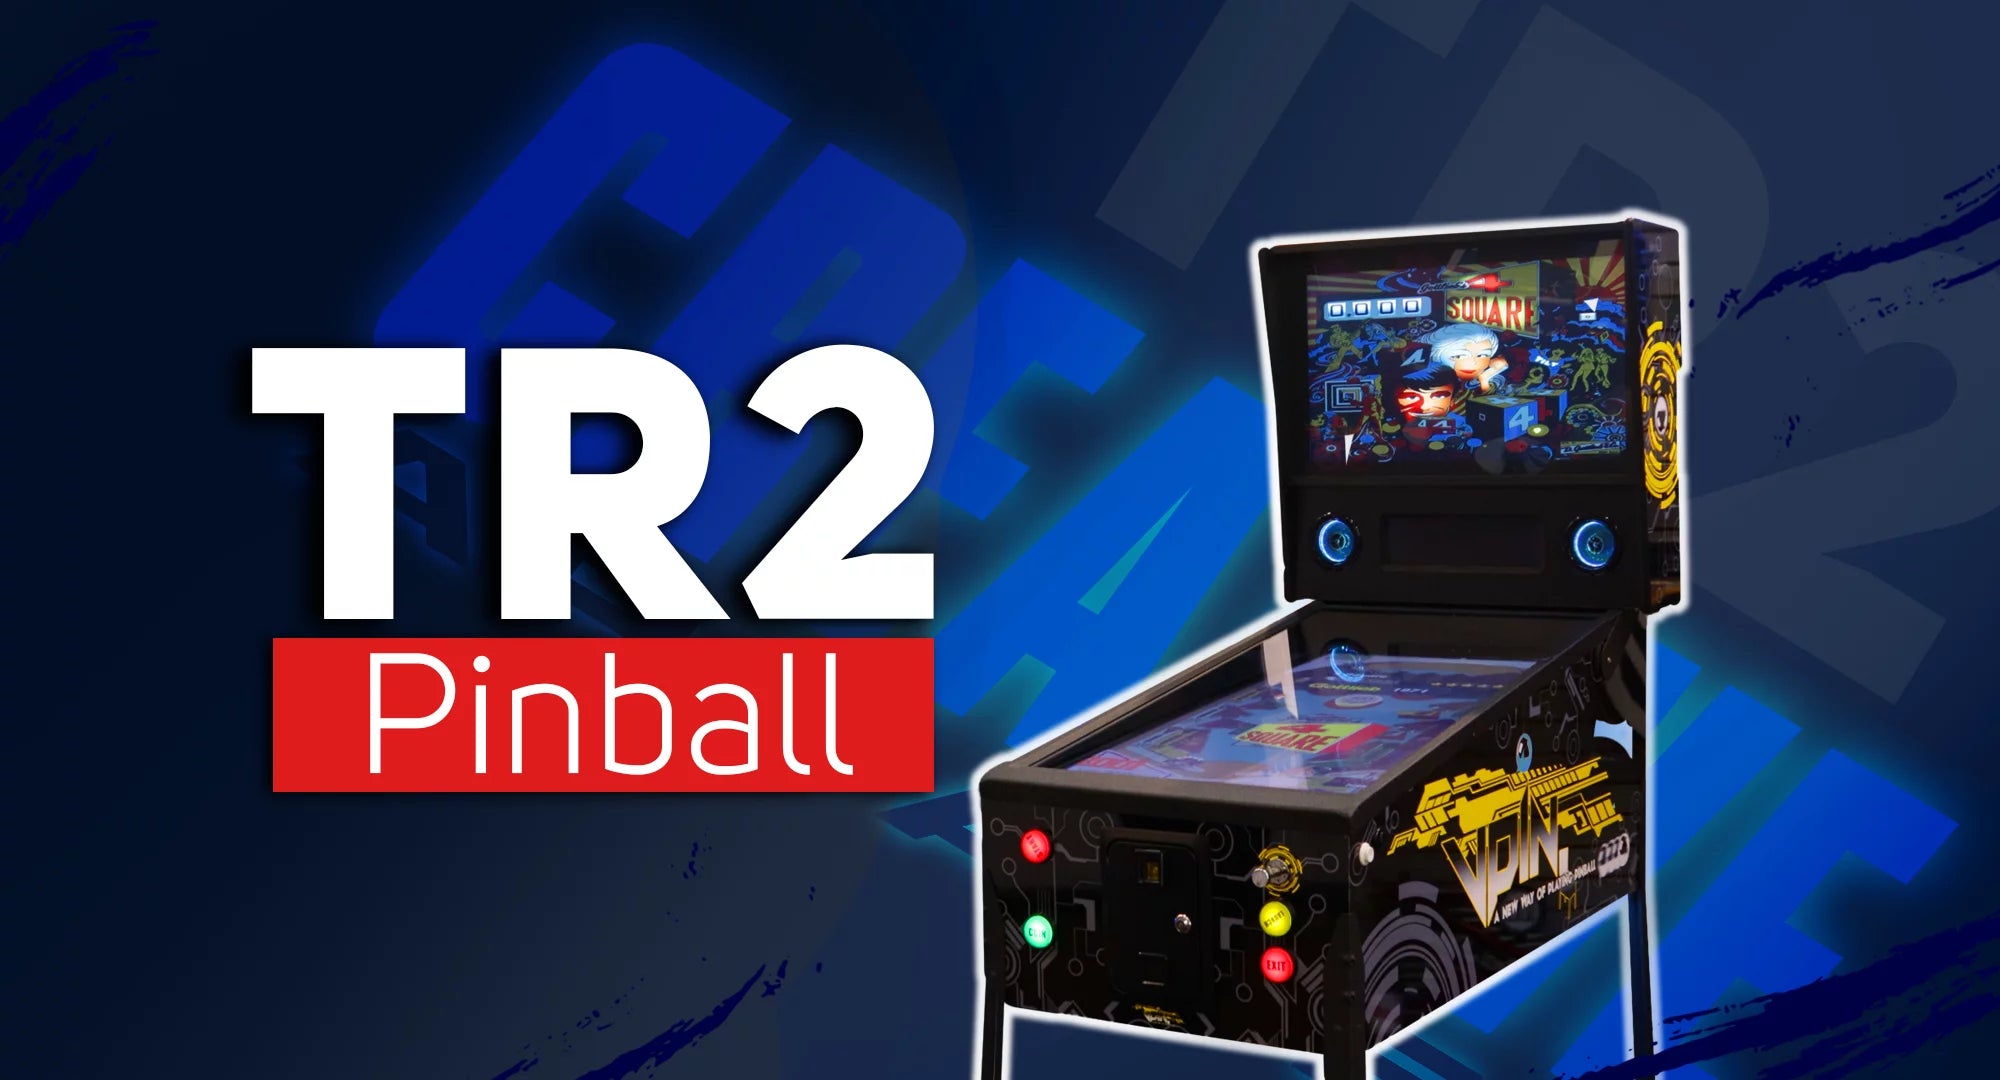 Our Best Selling Pinball Machine - TR2